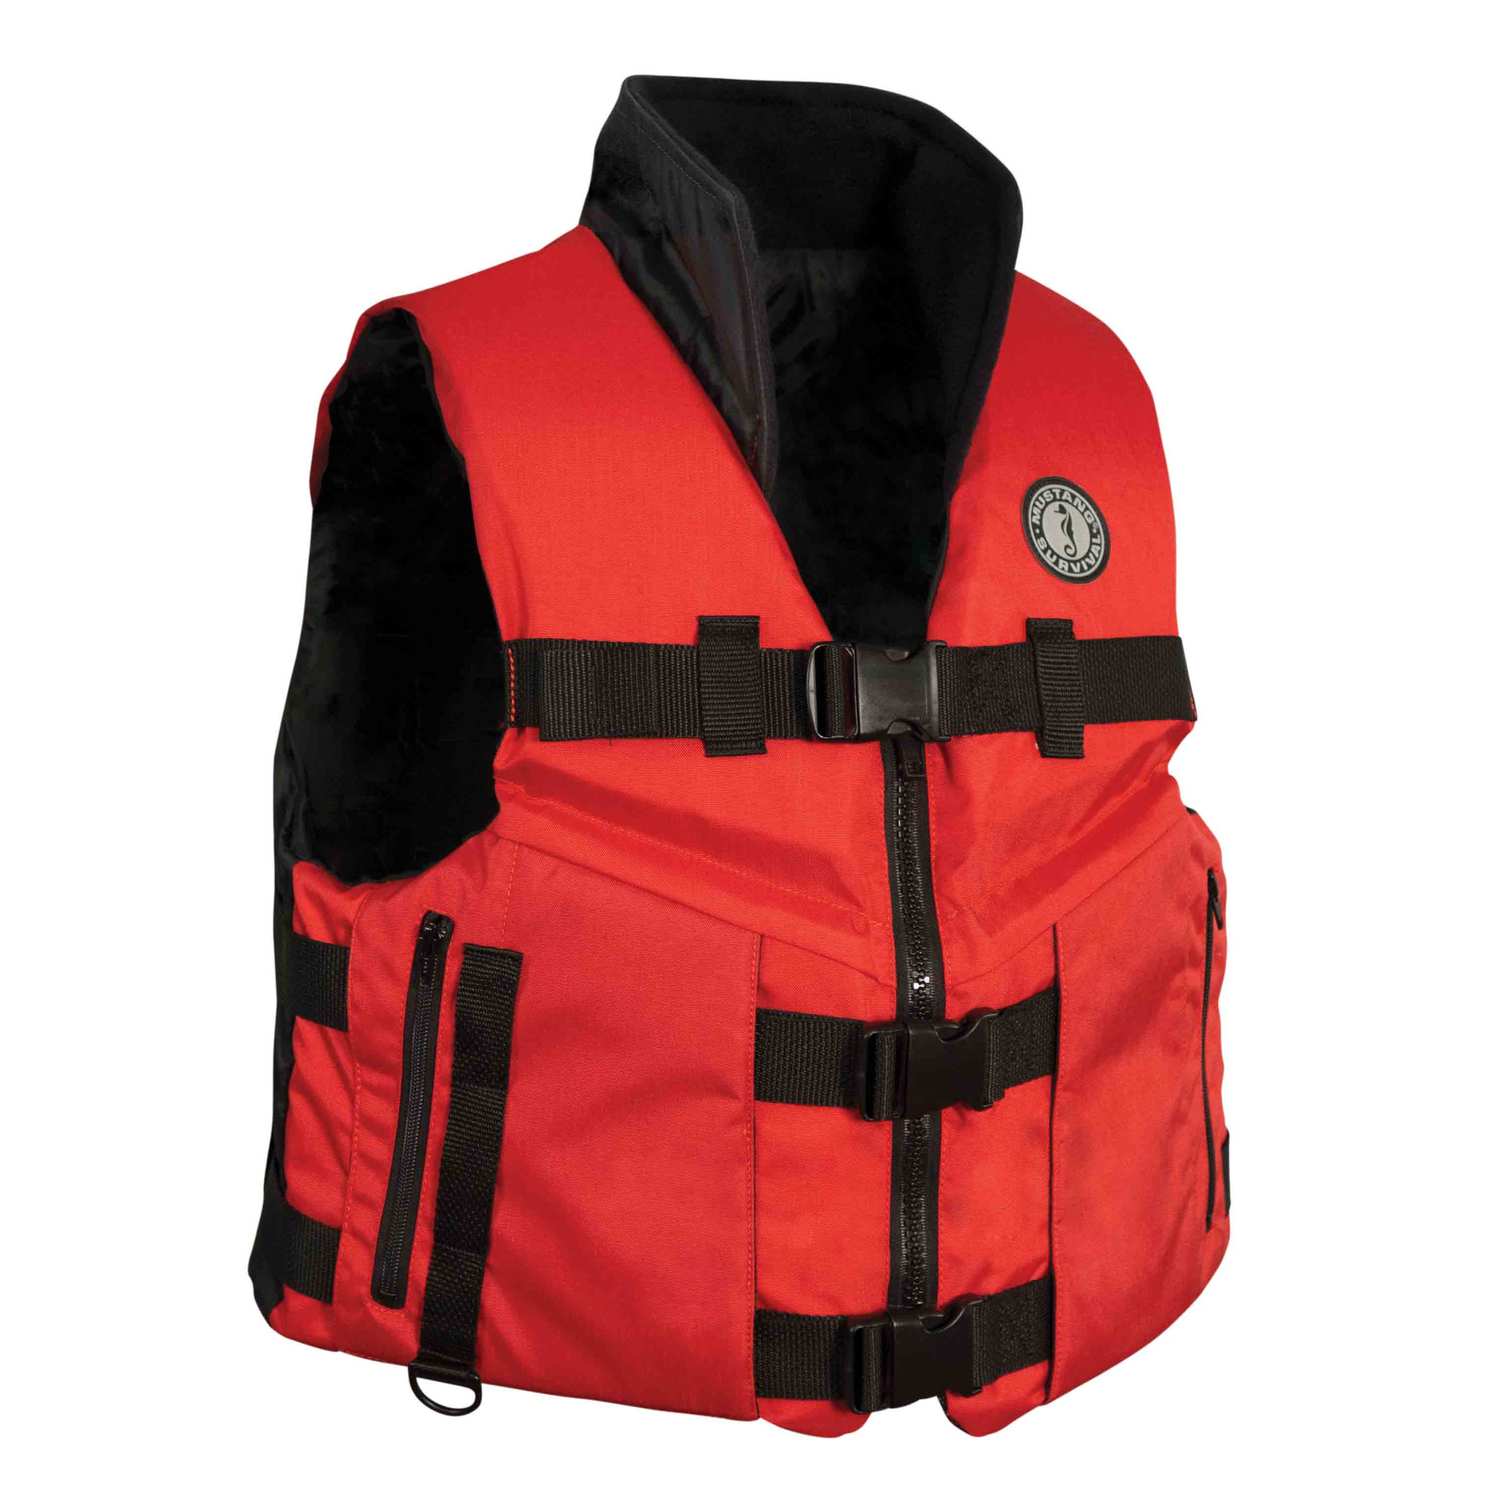 ACCEL100 Fishing Life Jacket, XXL, Red